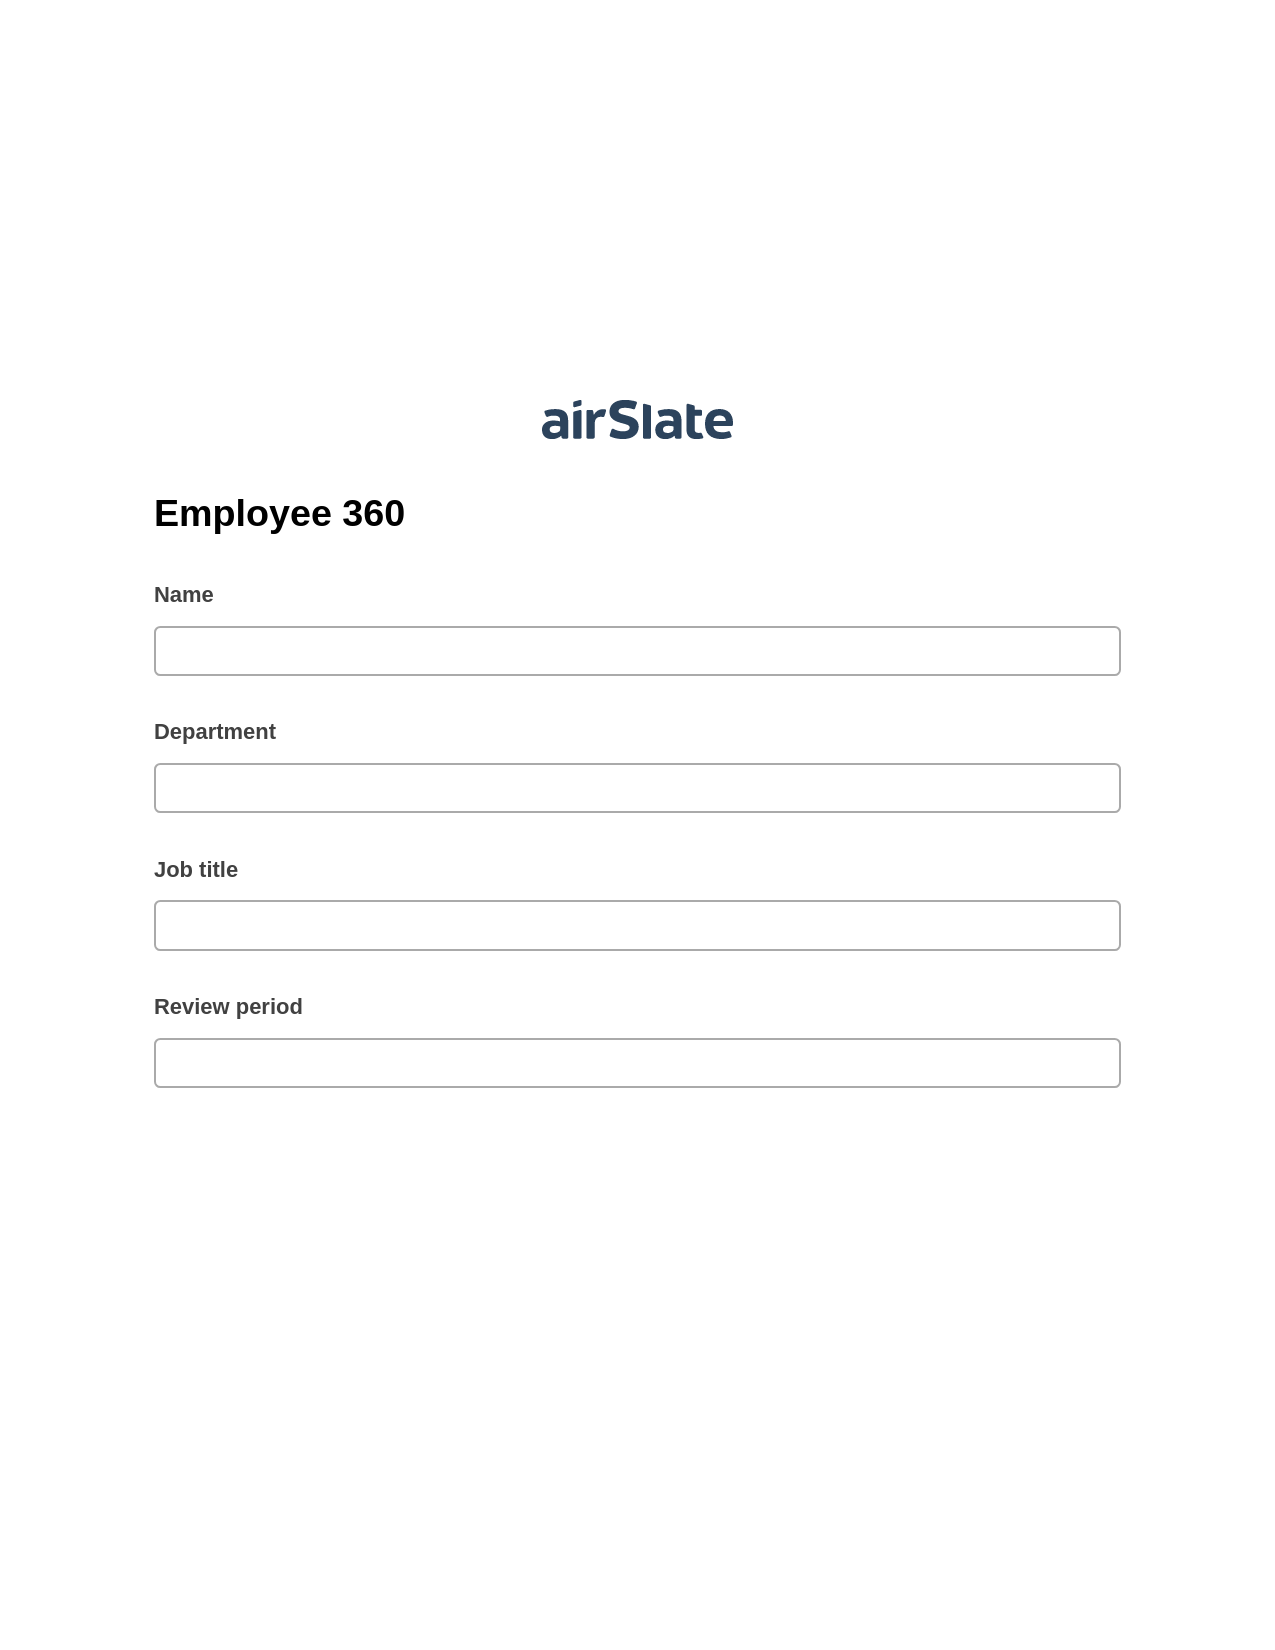 Employee 360 Pre-fill from CSV File Bot, Remove Slate Bot, Export to Excel 365 Bot